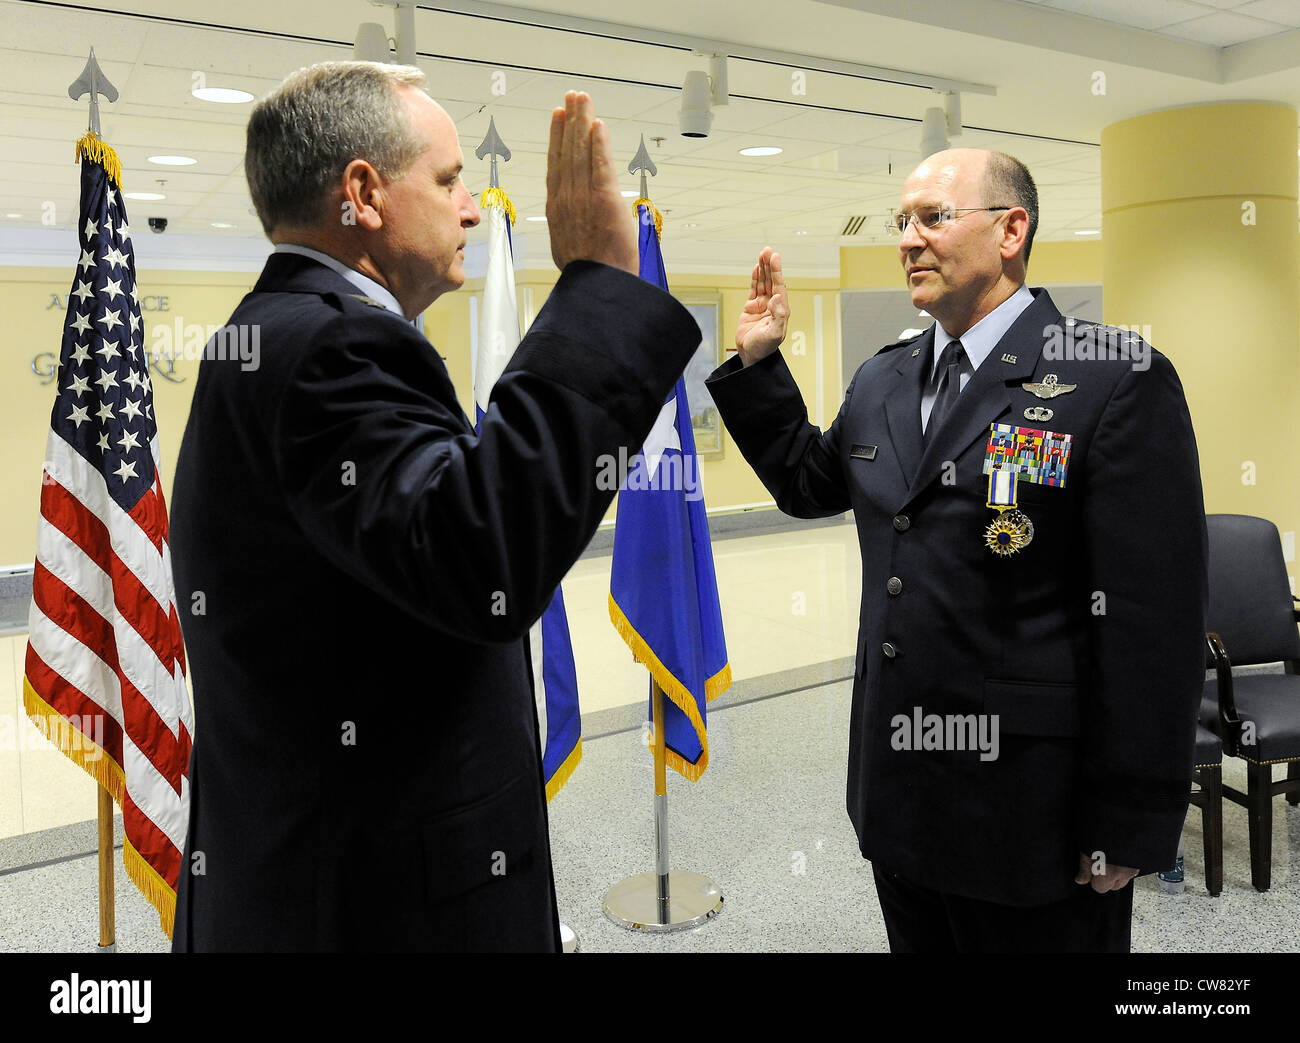 Newly-promoted Lt. Gen. James 'JJ' Jackson recites the oath of office to Air Force Chief of Staff Gen. Mark A. Welsh III during his promotion ceremony at the Pentagon, Aug. 16, 2012. Jackson is the commander of Air Force Reserve Command and the chief of the Air Force Reserve. Stock Photo